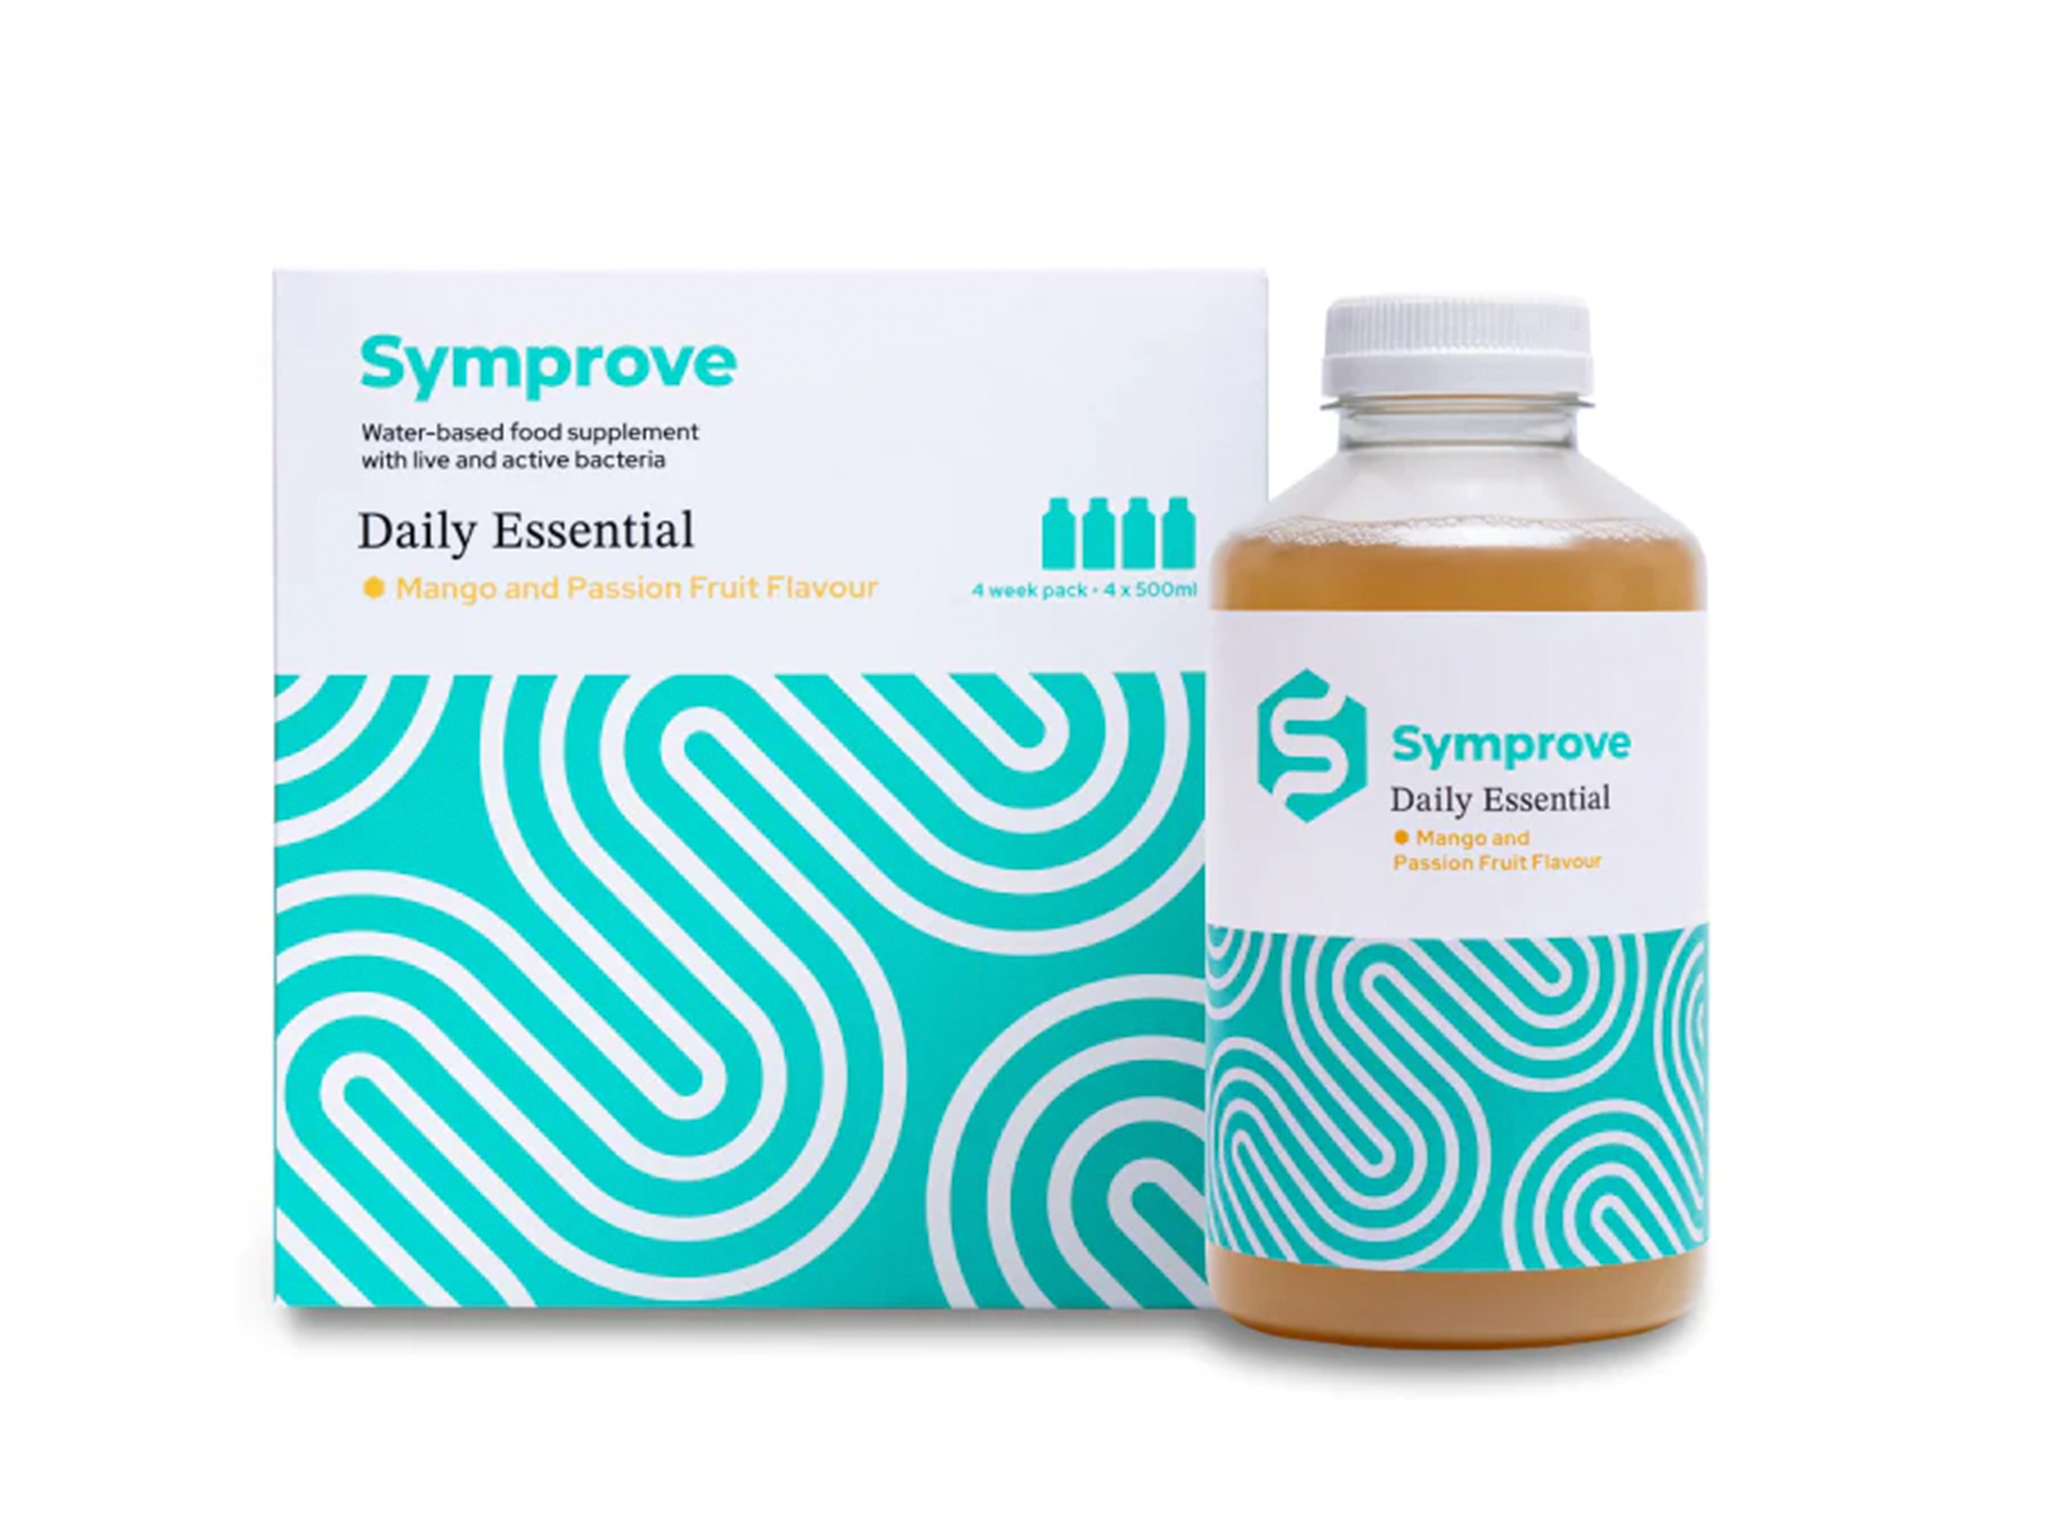 Symprove daily essential, one month’s supply